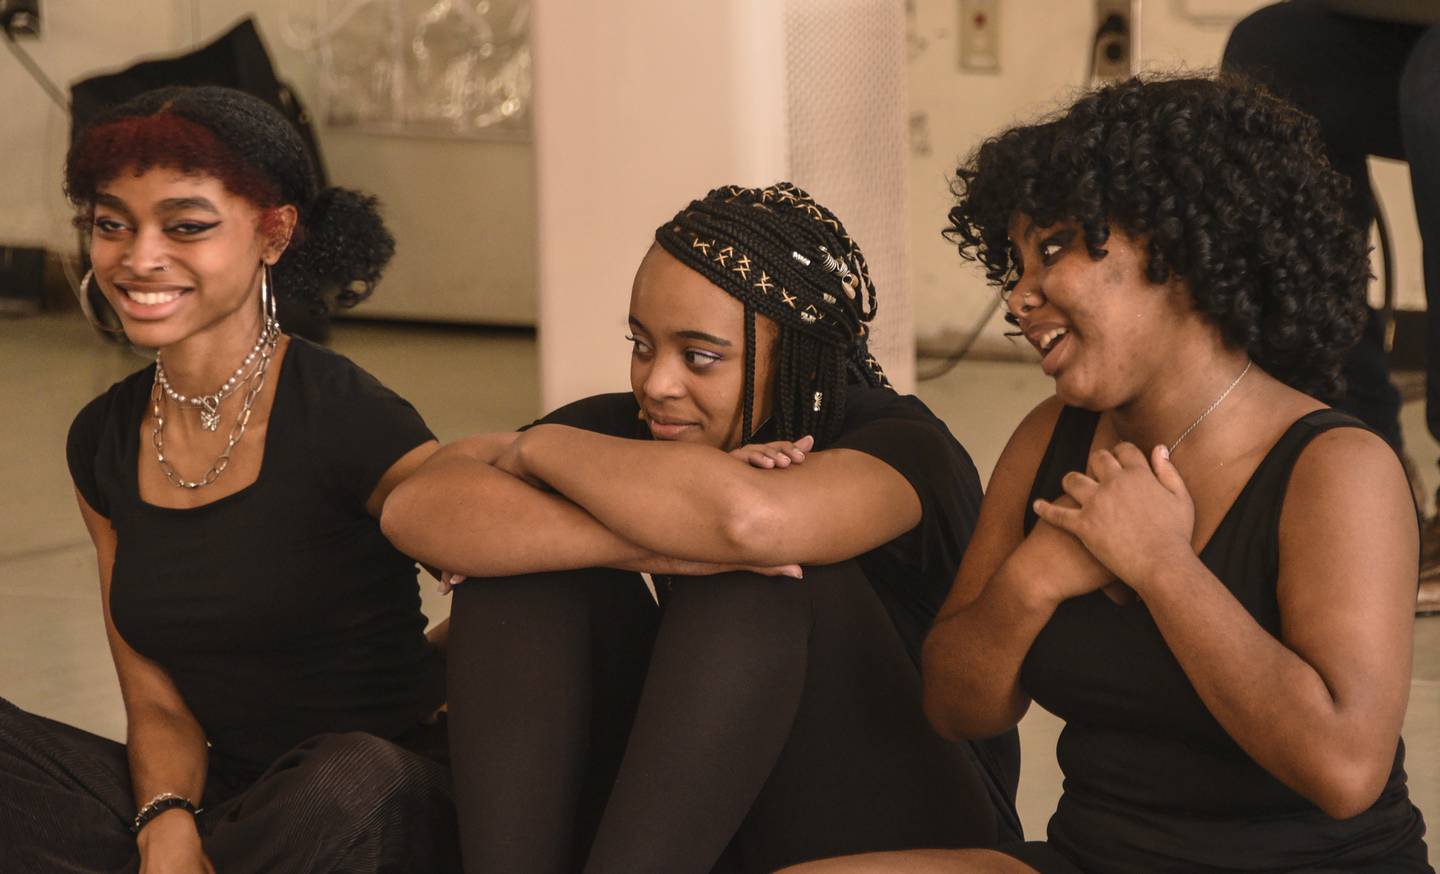 Current Baltimore School for the Arts theater students (from left) Indigo Turner, Shiane Sullivan, and Aliah Evans react to an answer from Moses Ingram, star of Lady in the Lake and BSA alum